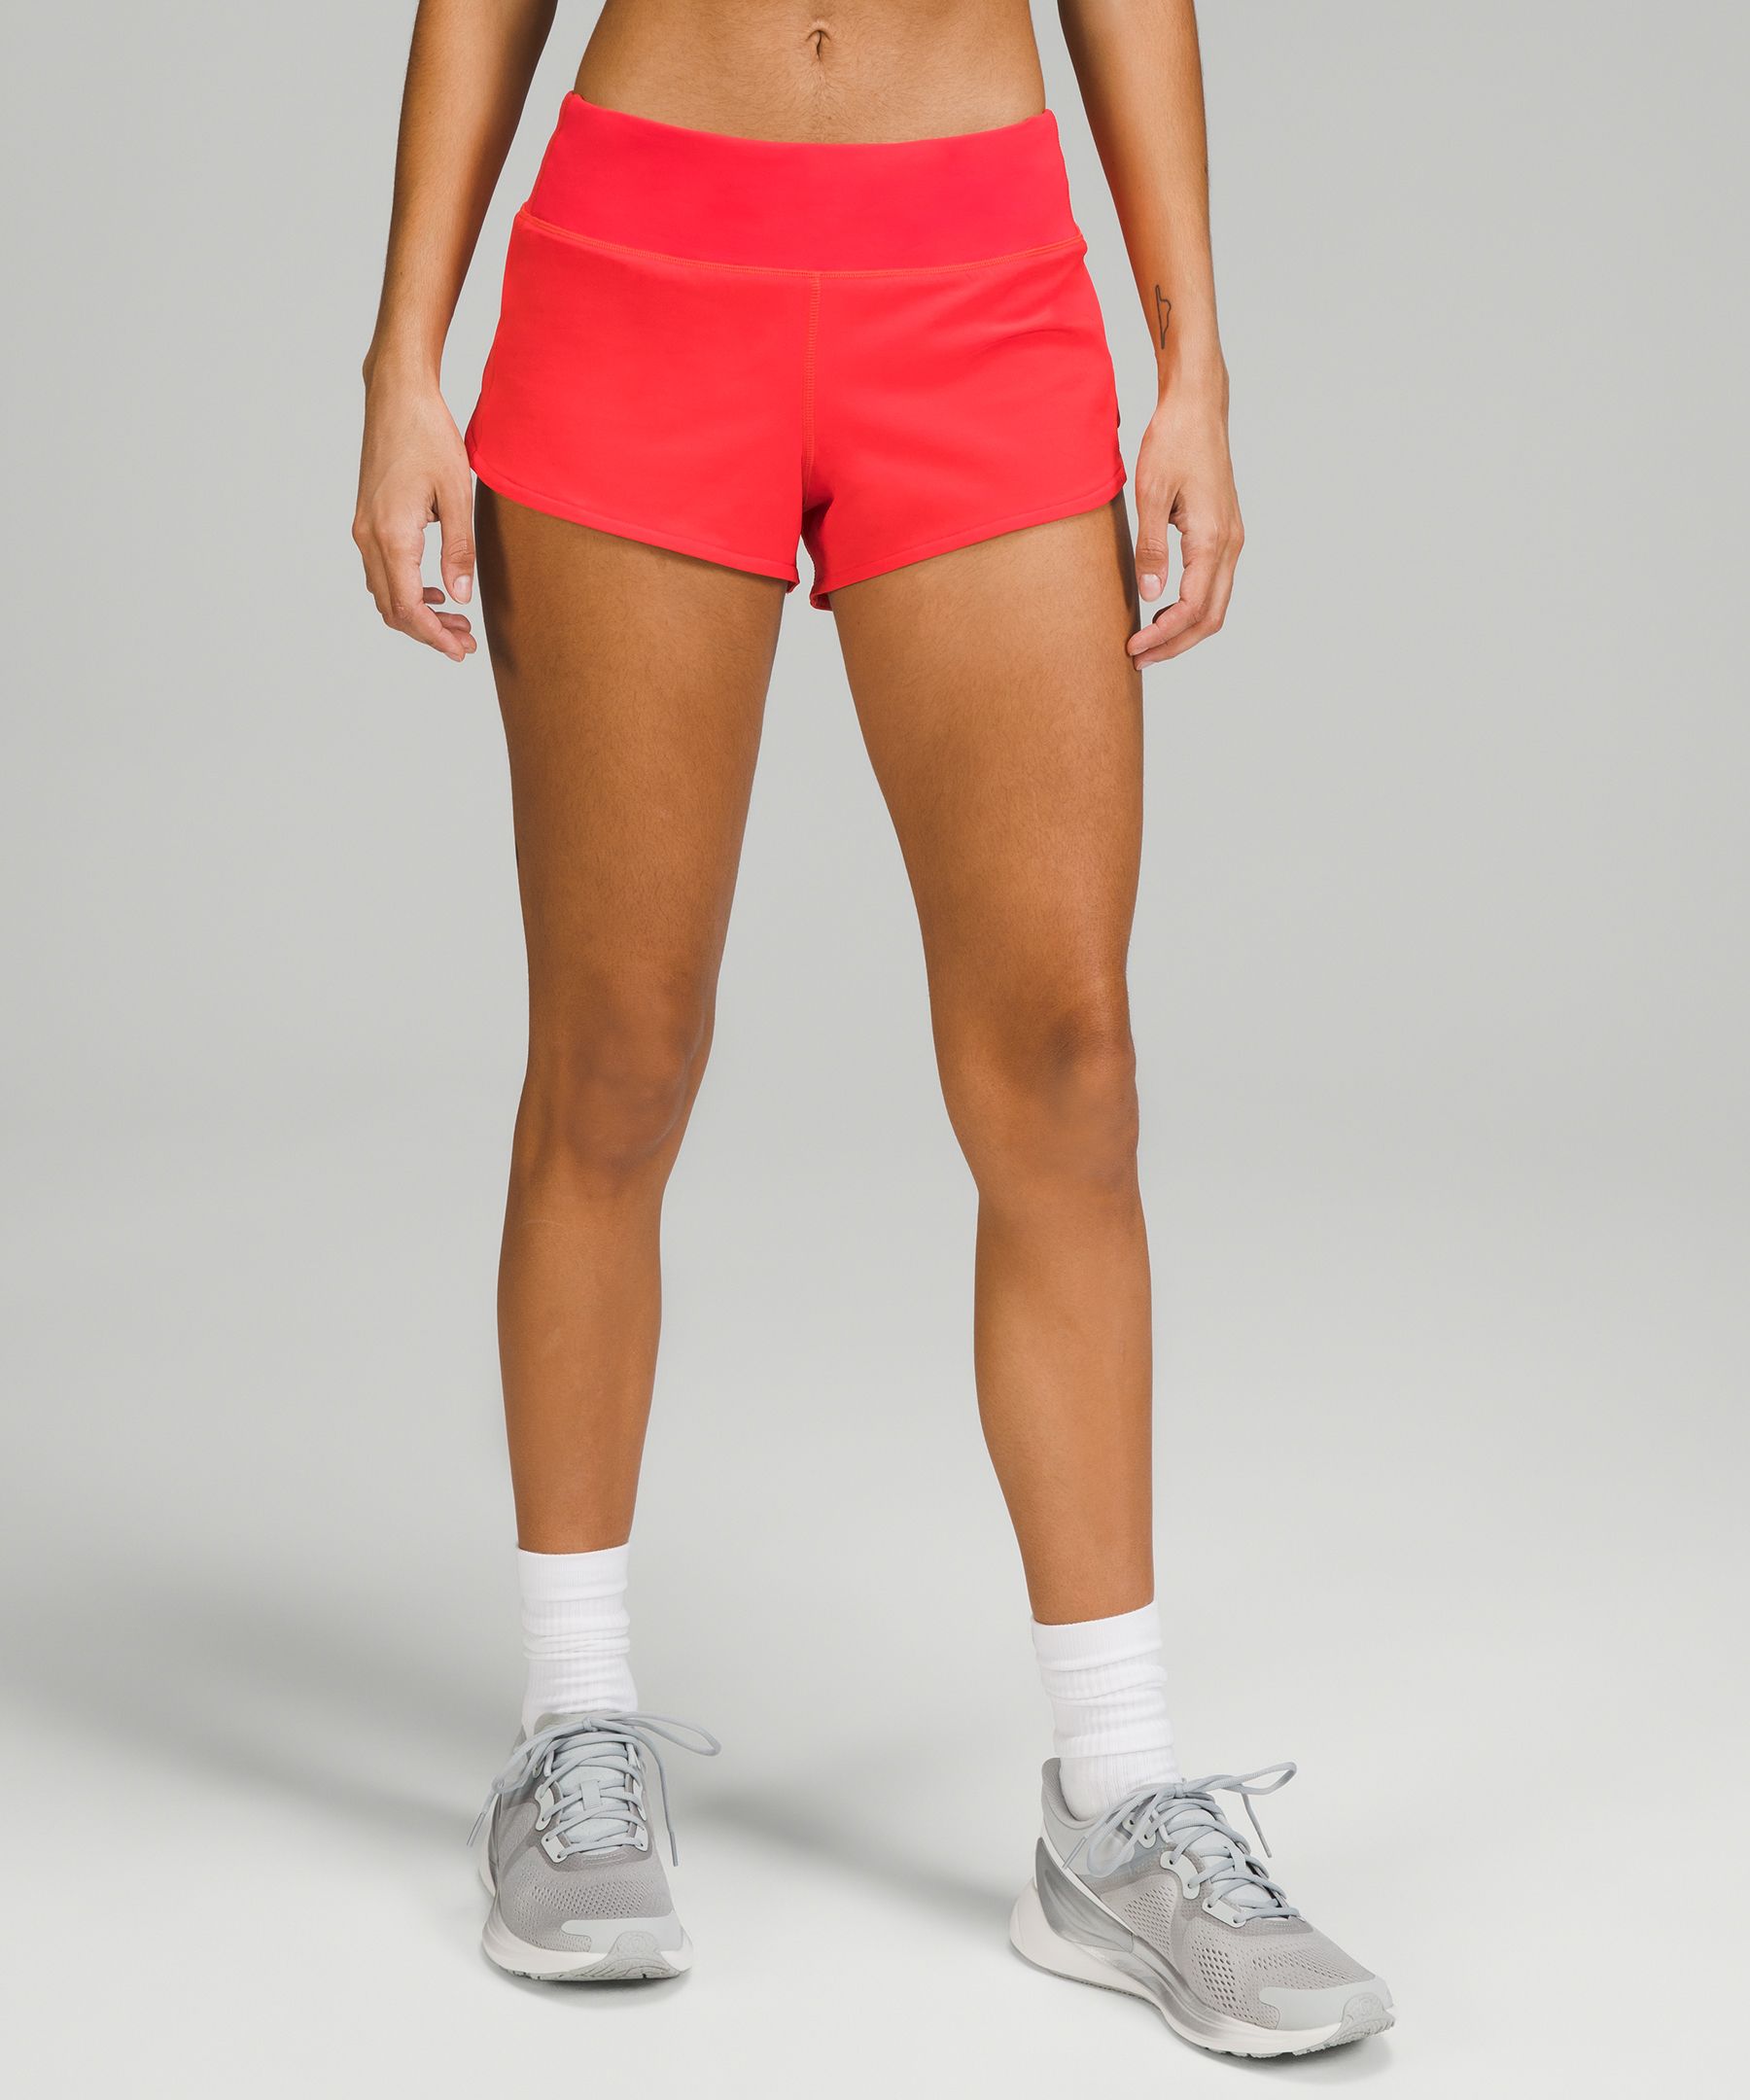 Lululemon Speed Up High-rise Lined Shorts 2.5" In Carnation Red